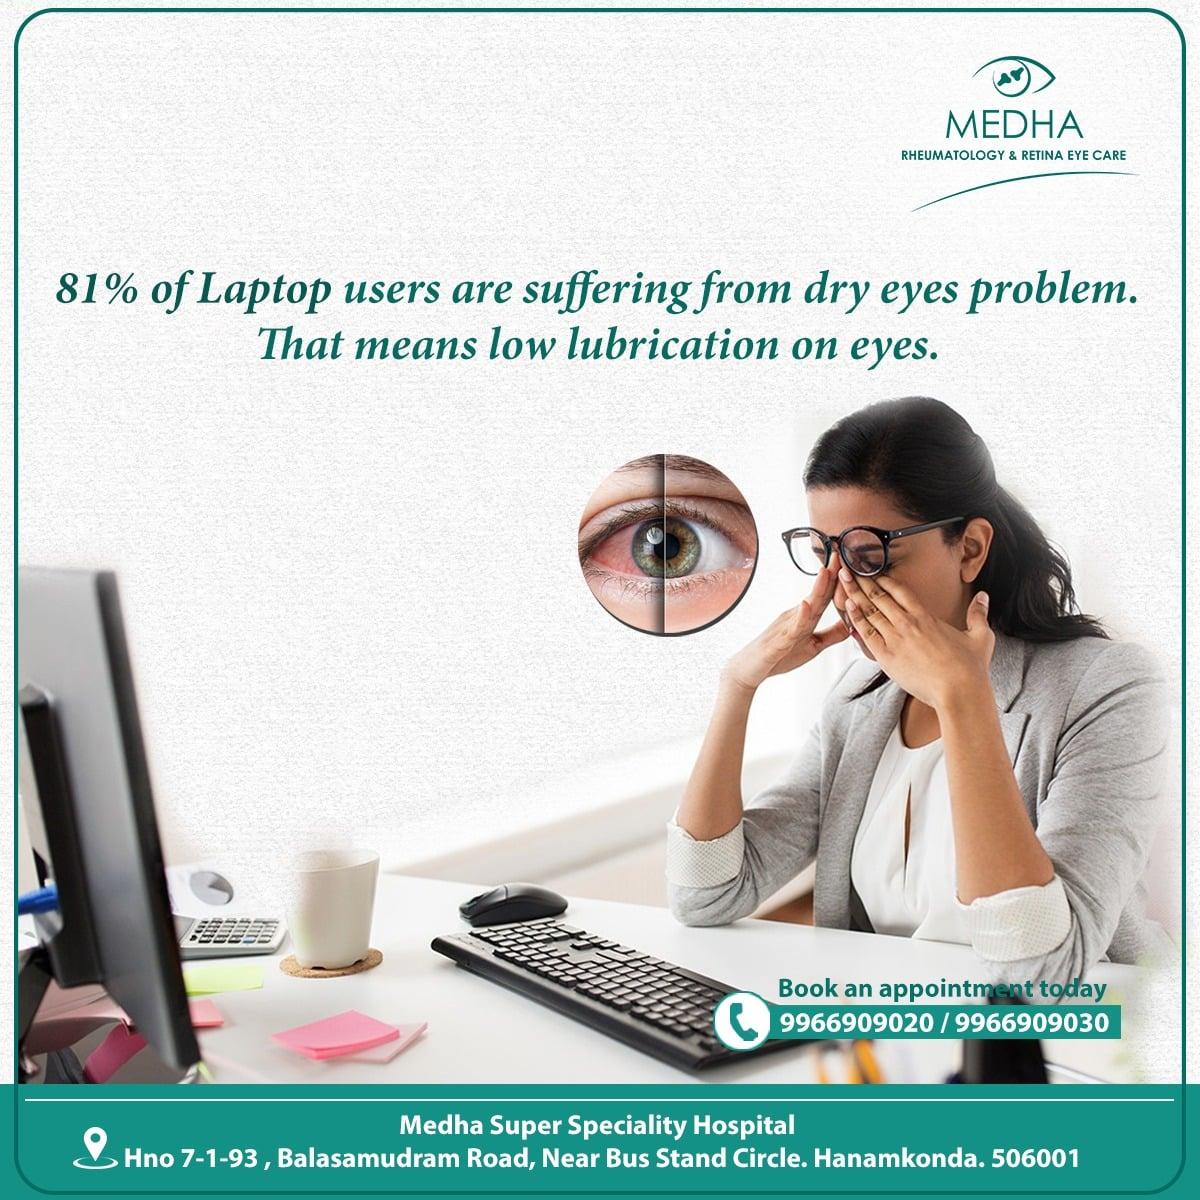 Laptop Users Mostly Suffer From DRY EYES PROBLEM....